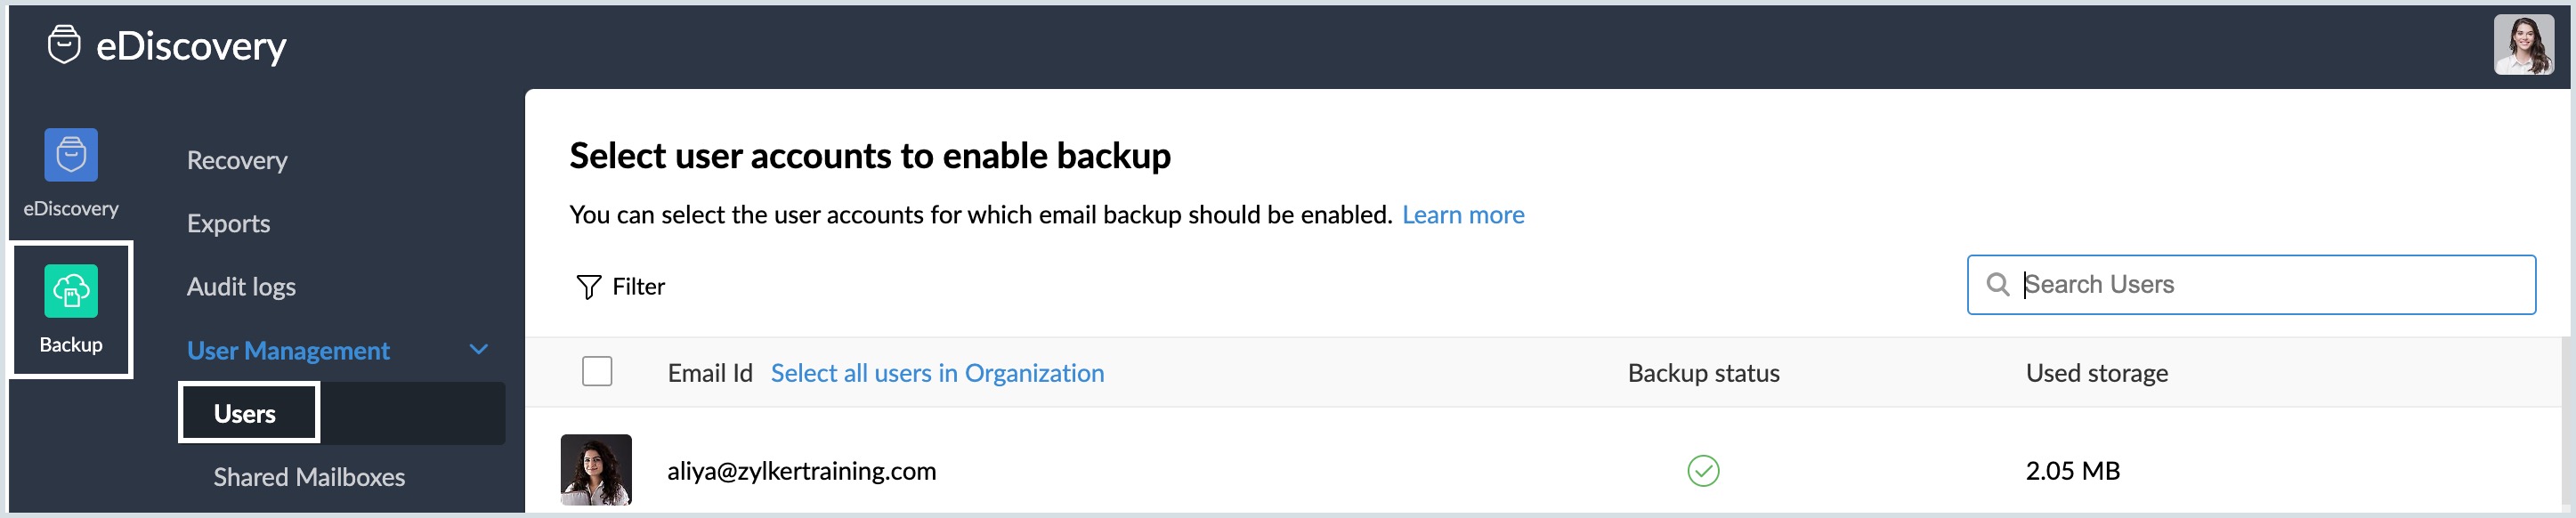 manage users for email backup